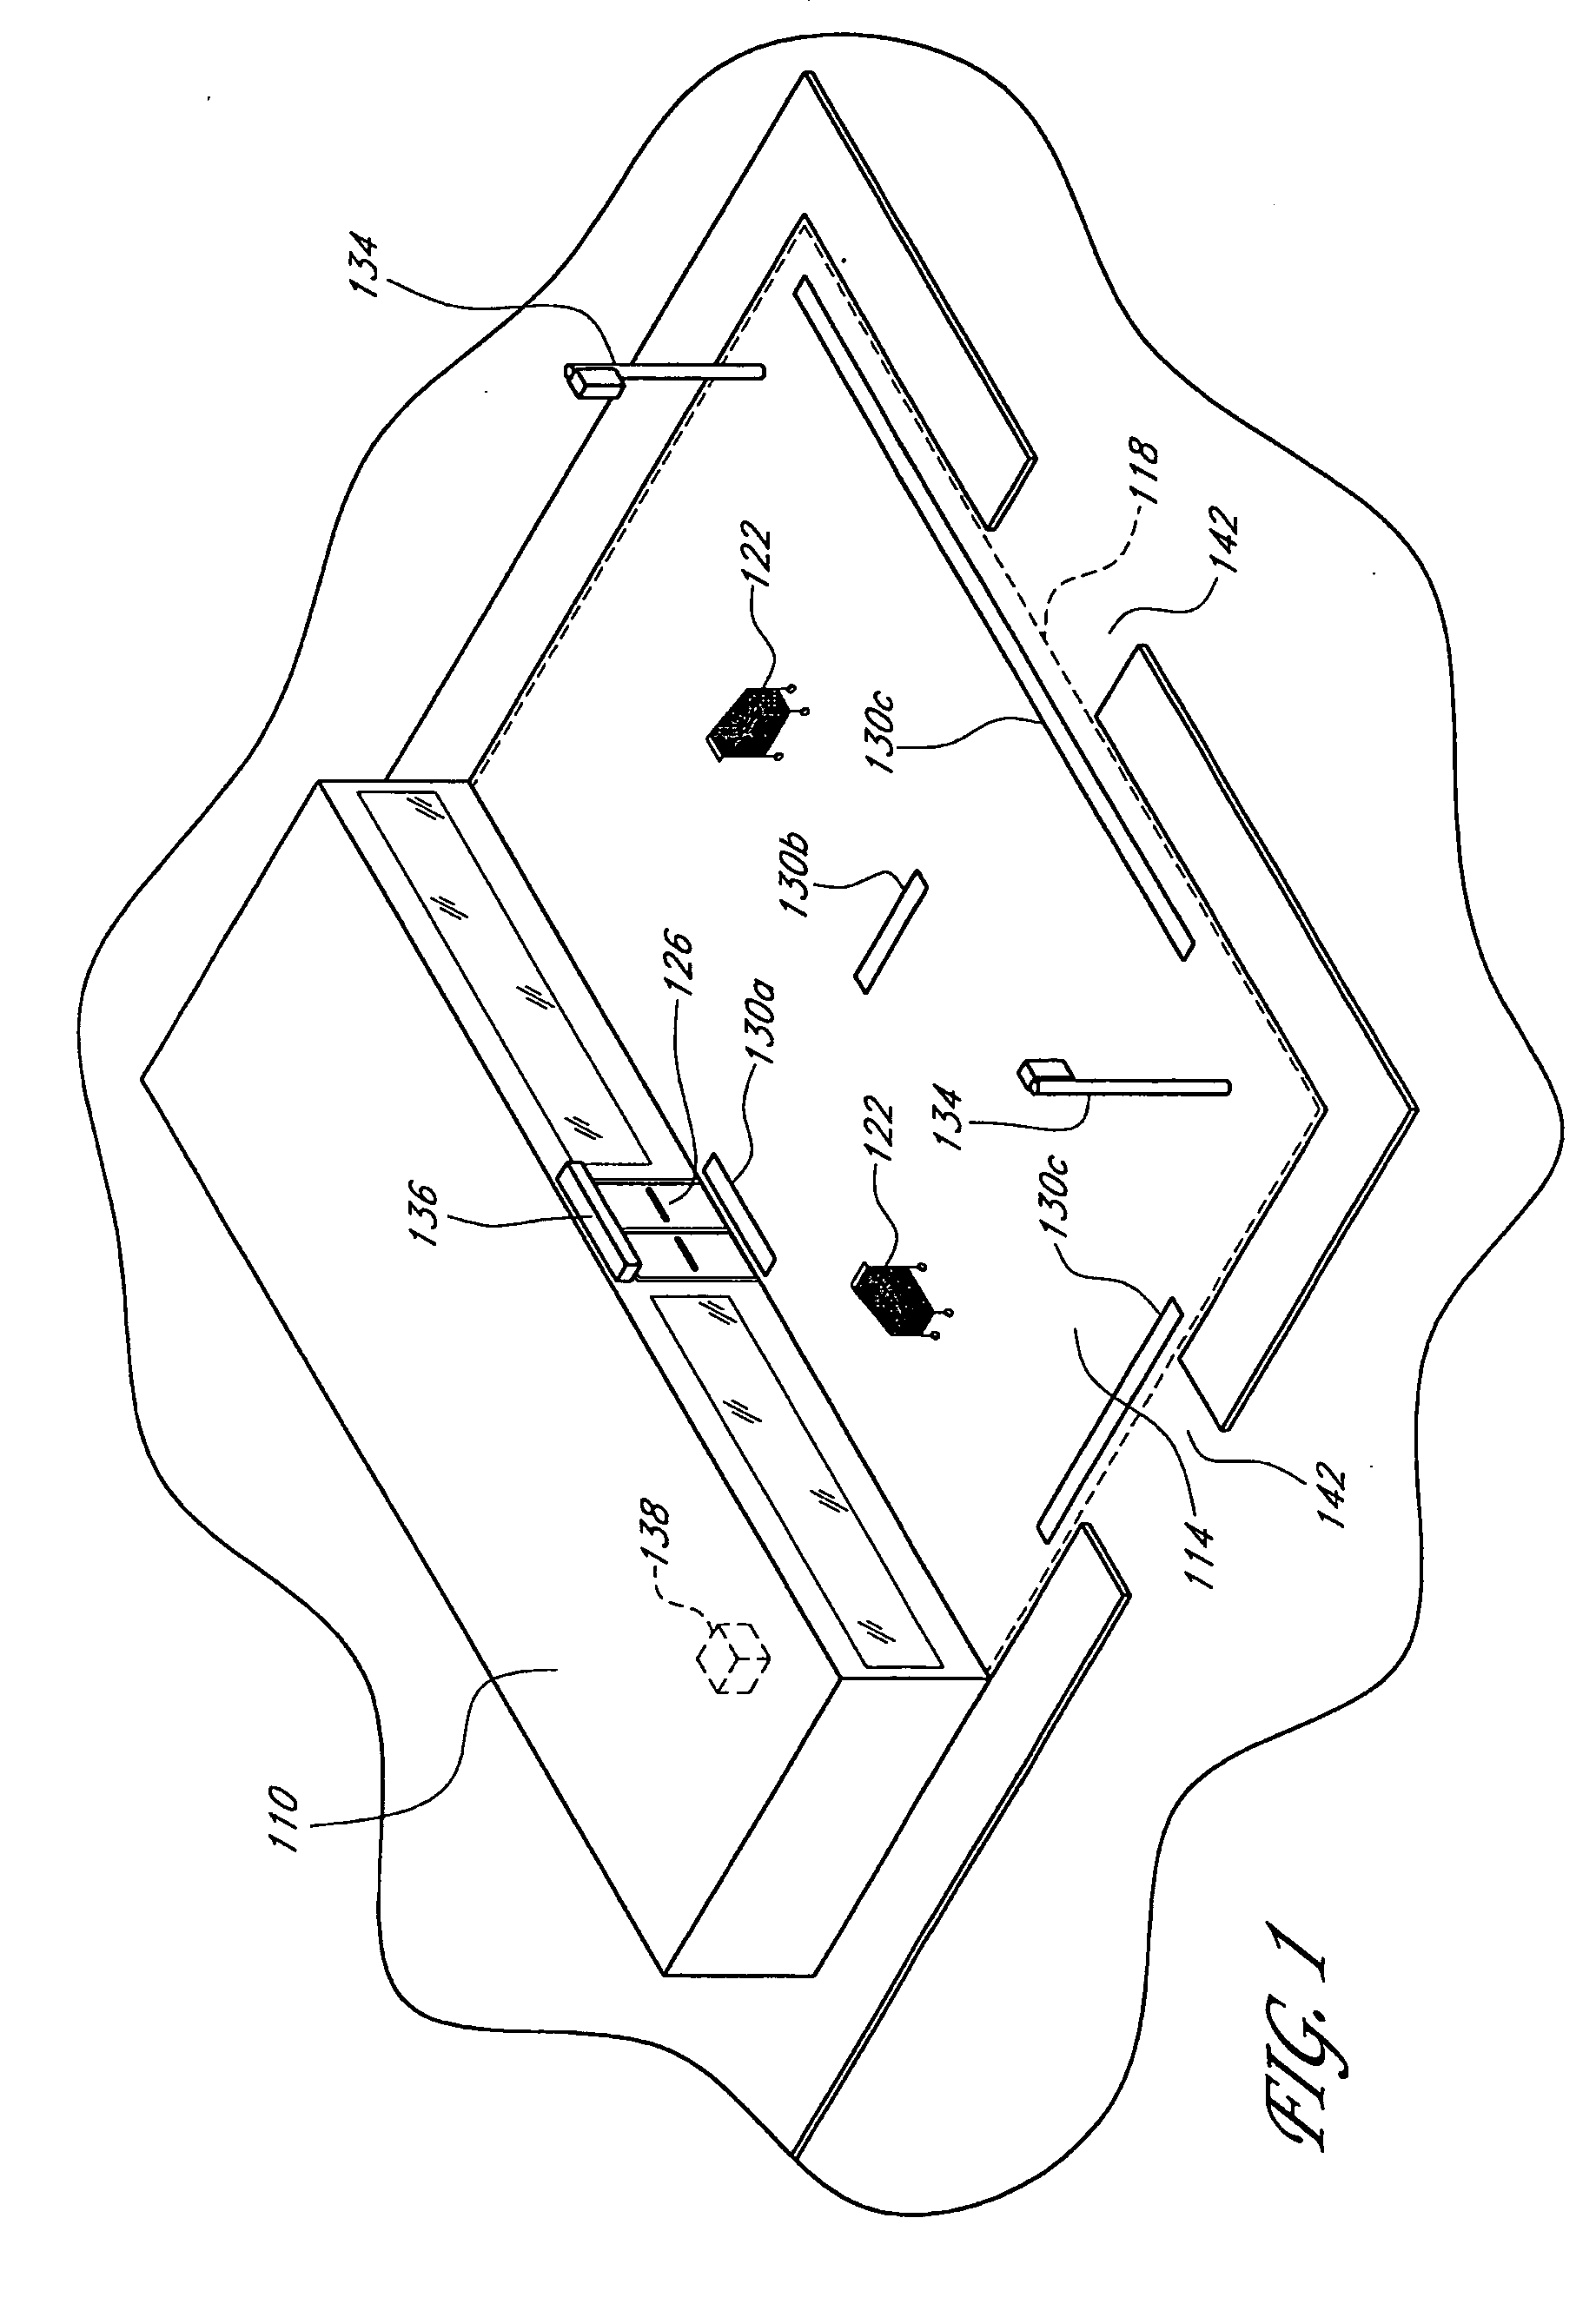 Power generation systems and methods for wheeled objects